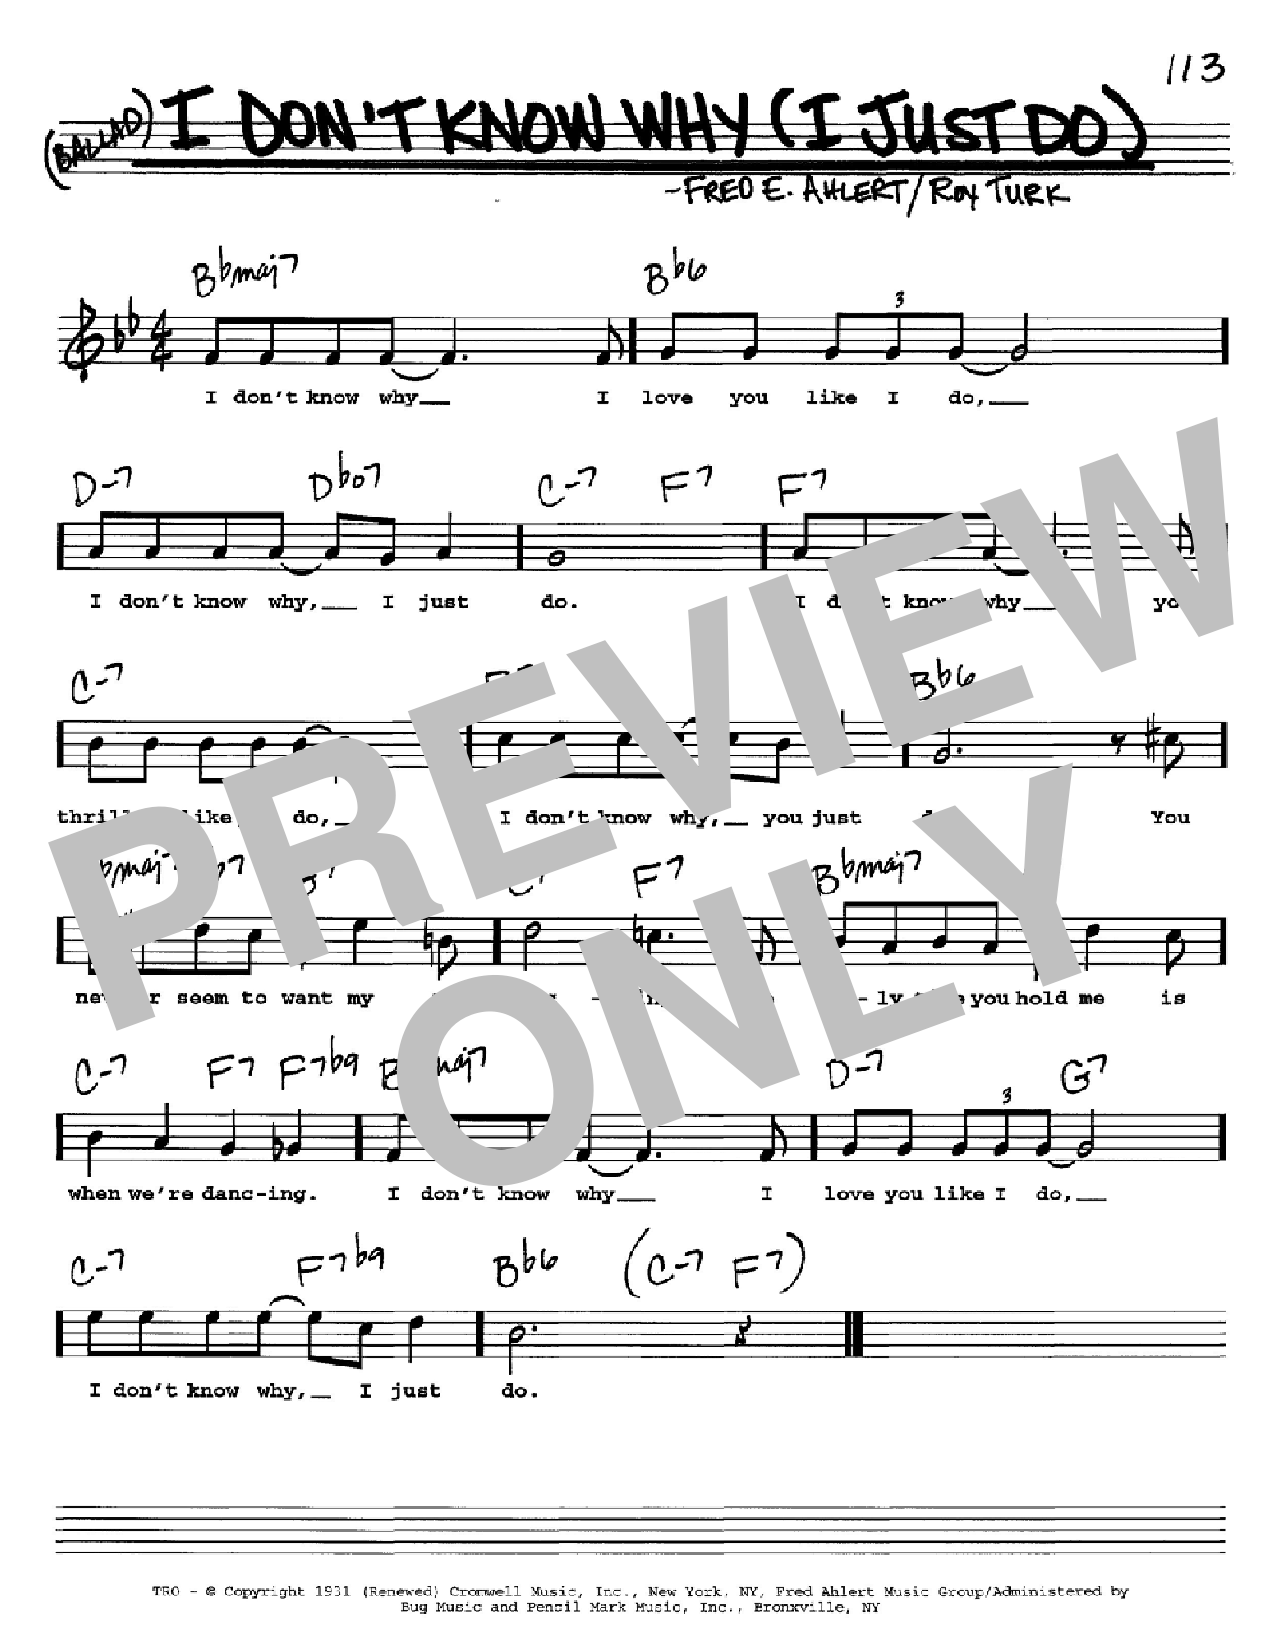 Download Frank Sinatra I Don't Know Why (I Just Do) Sheet Music